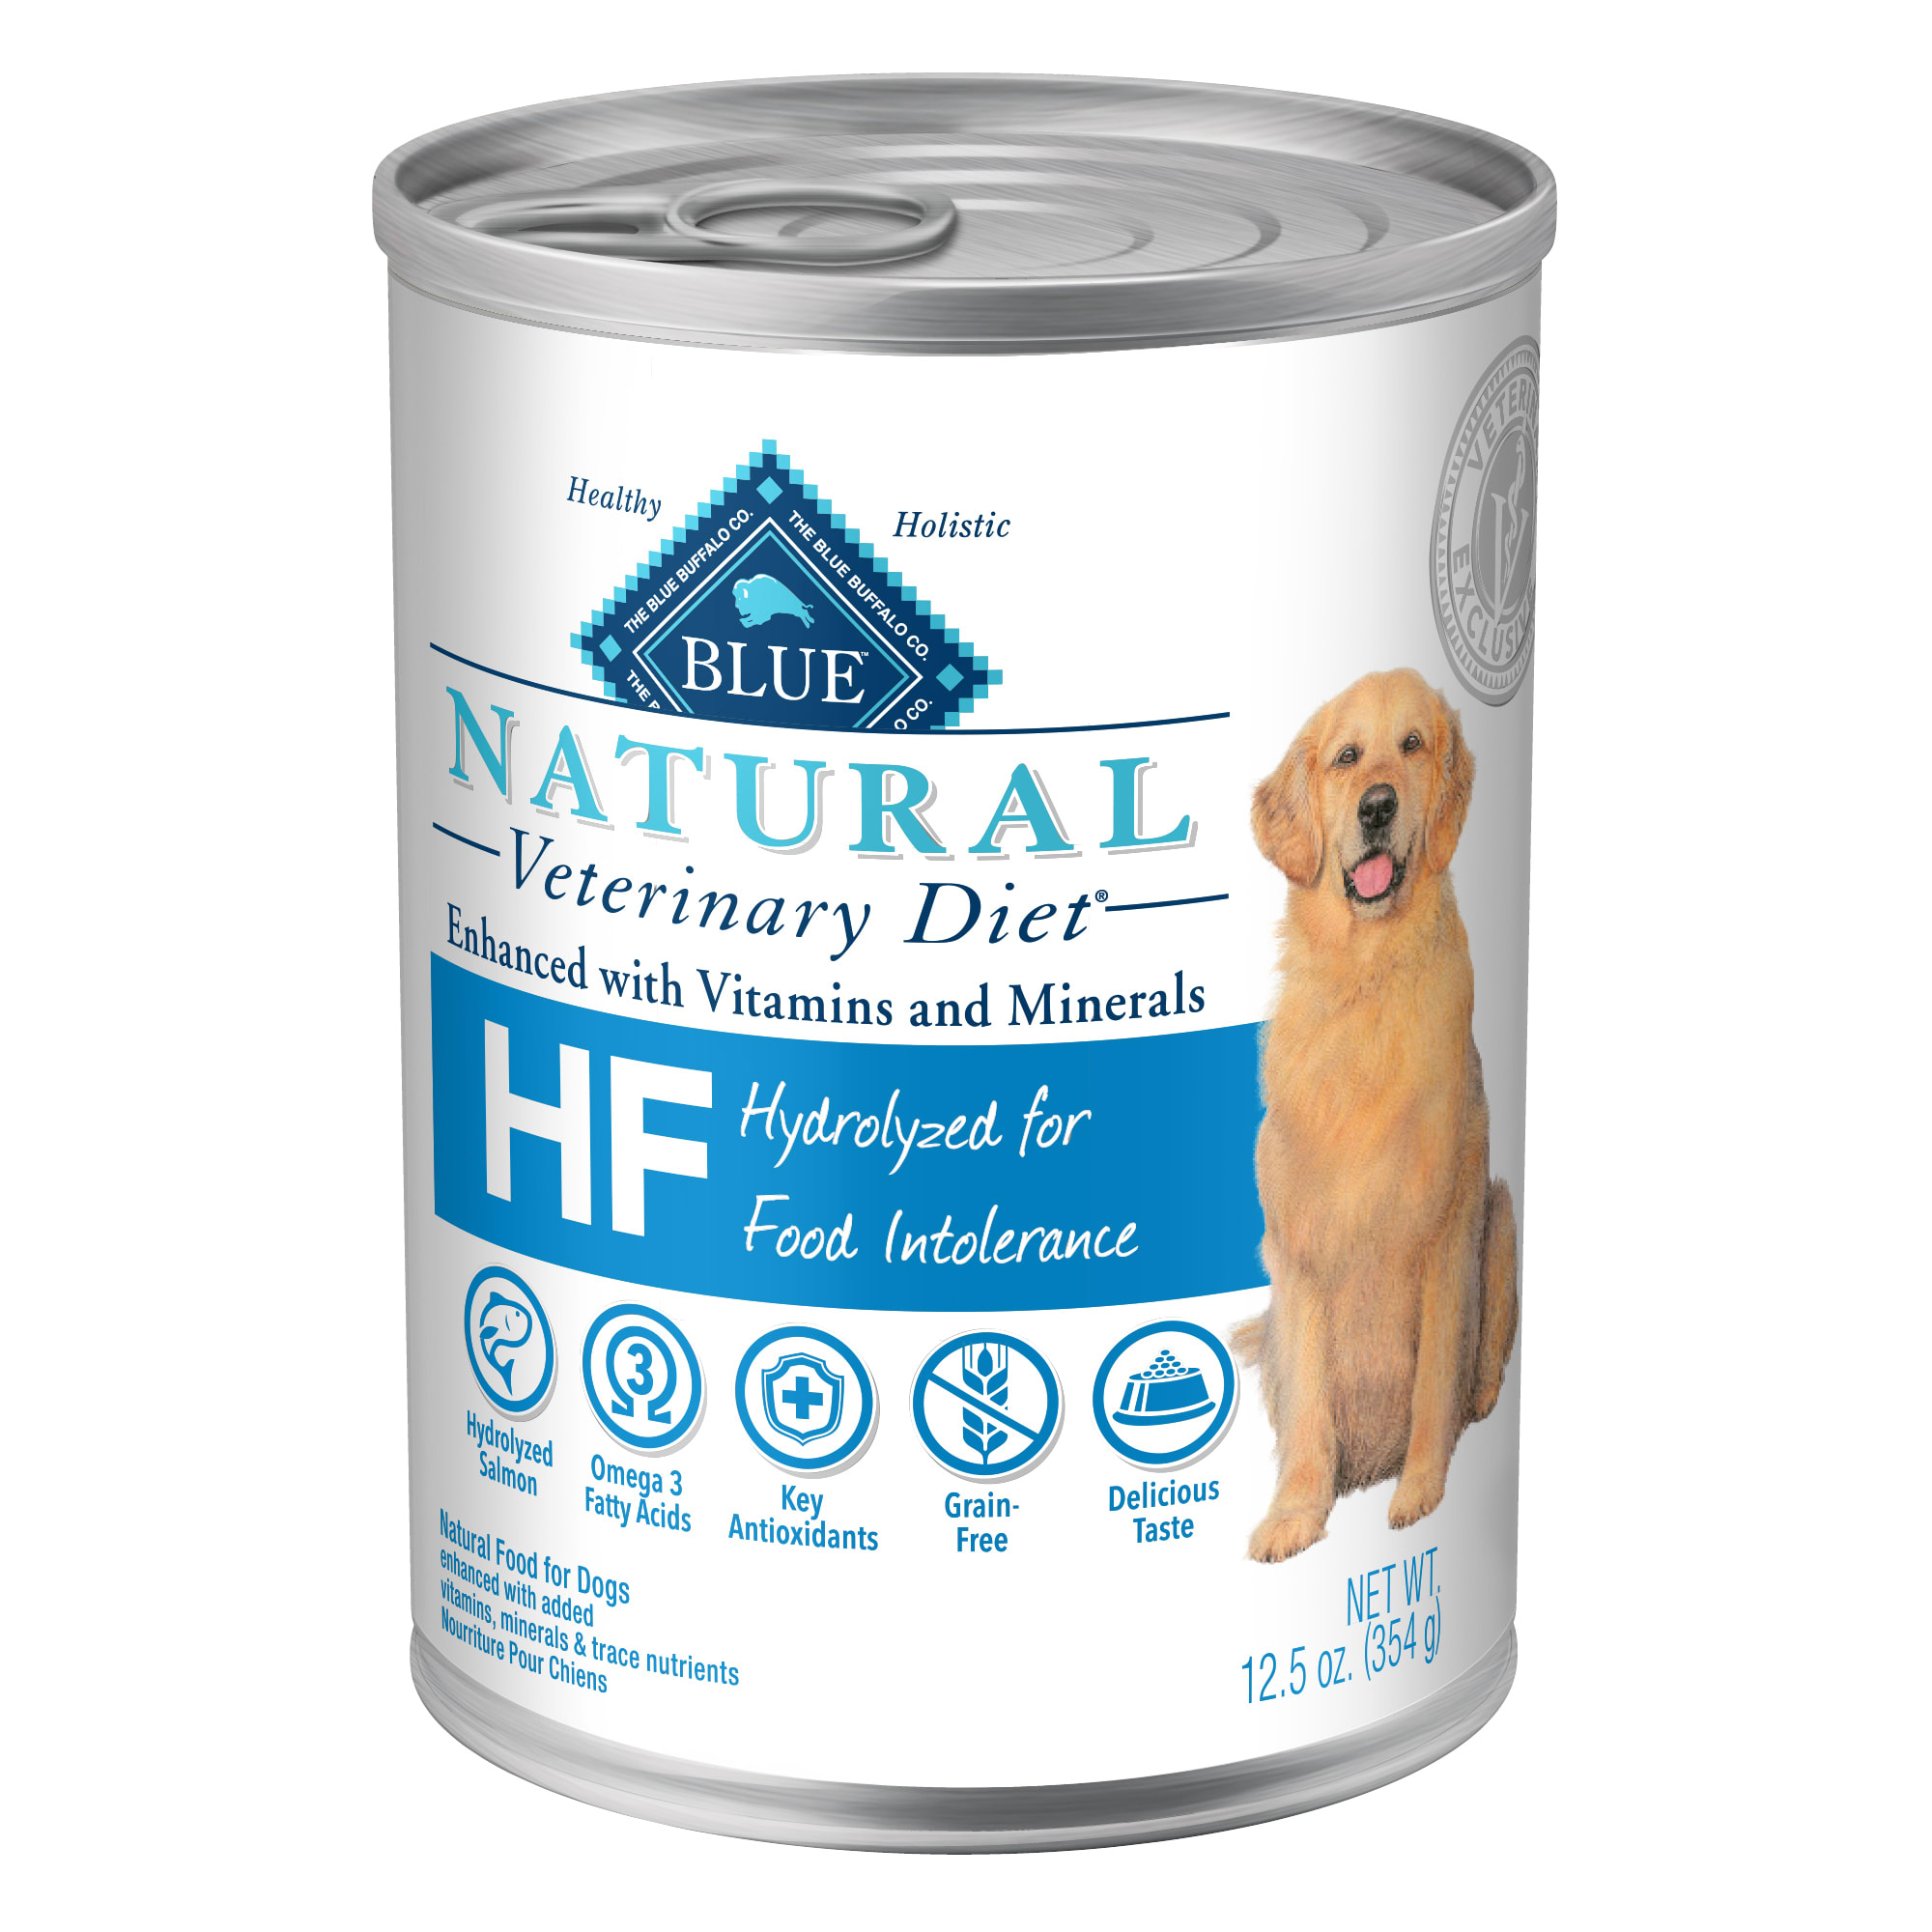 hydrolysed diet dogs